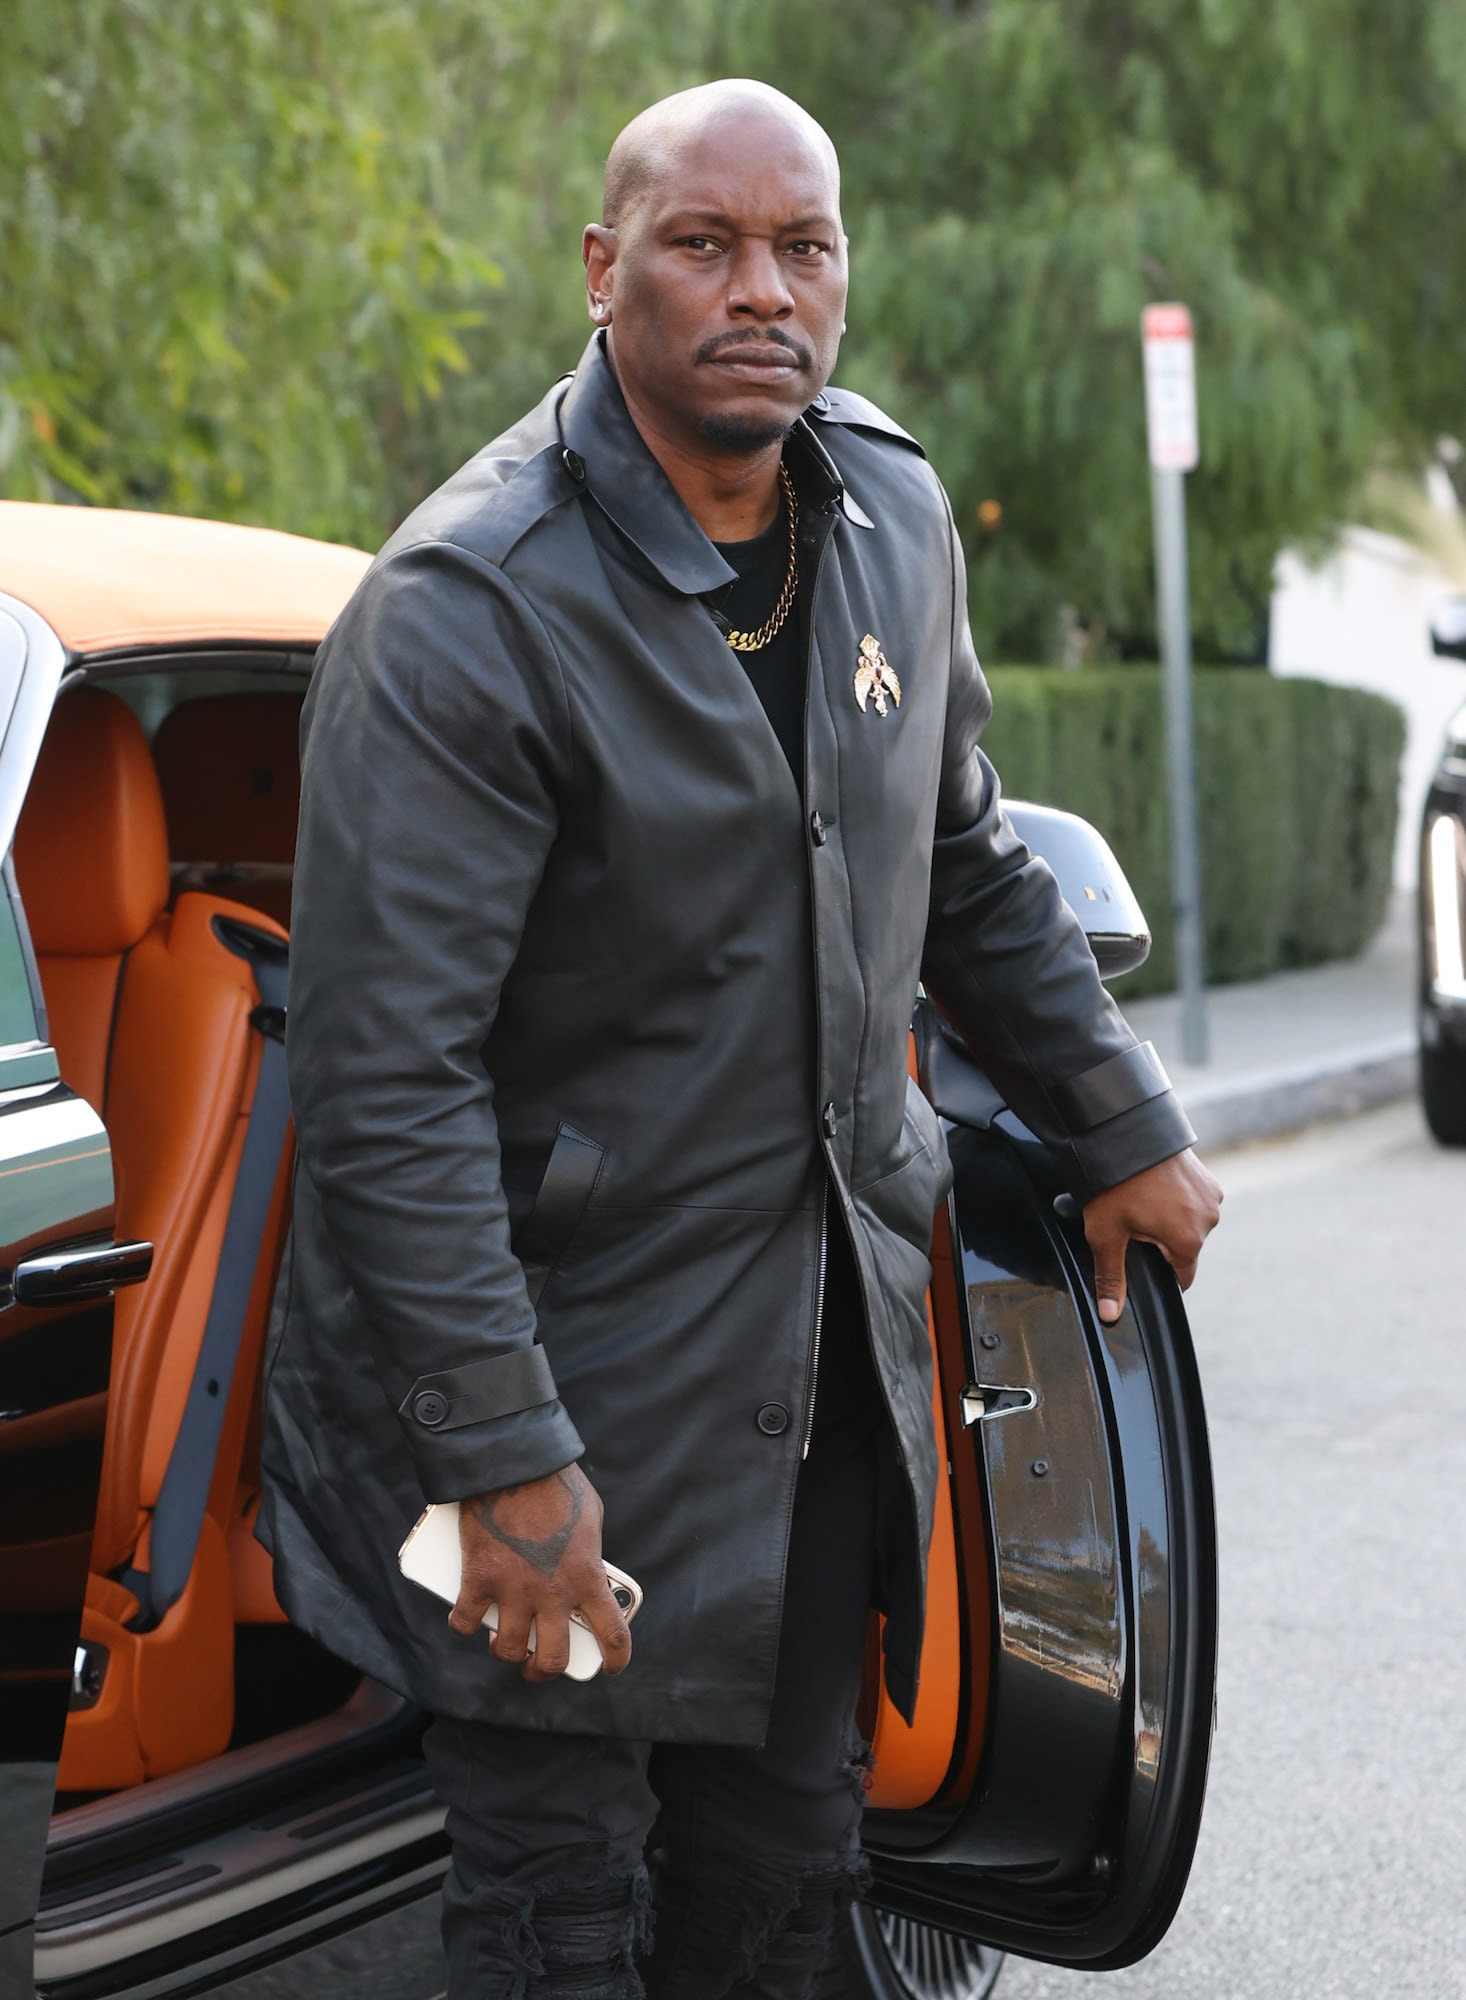 Tyrese Teases New Music About Samantha Lee Divorce: ‘Most Important Album I’ve Ever Done’